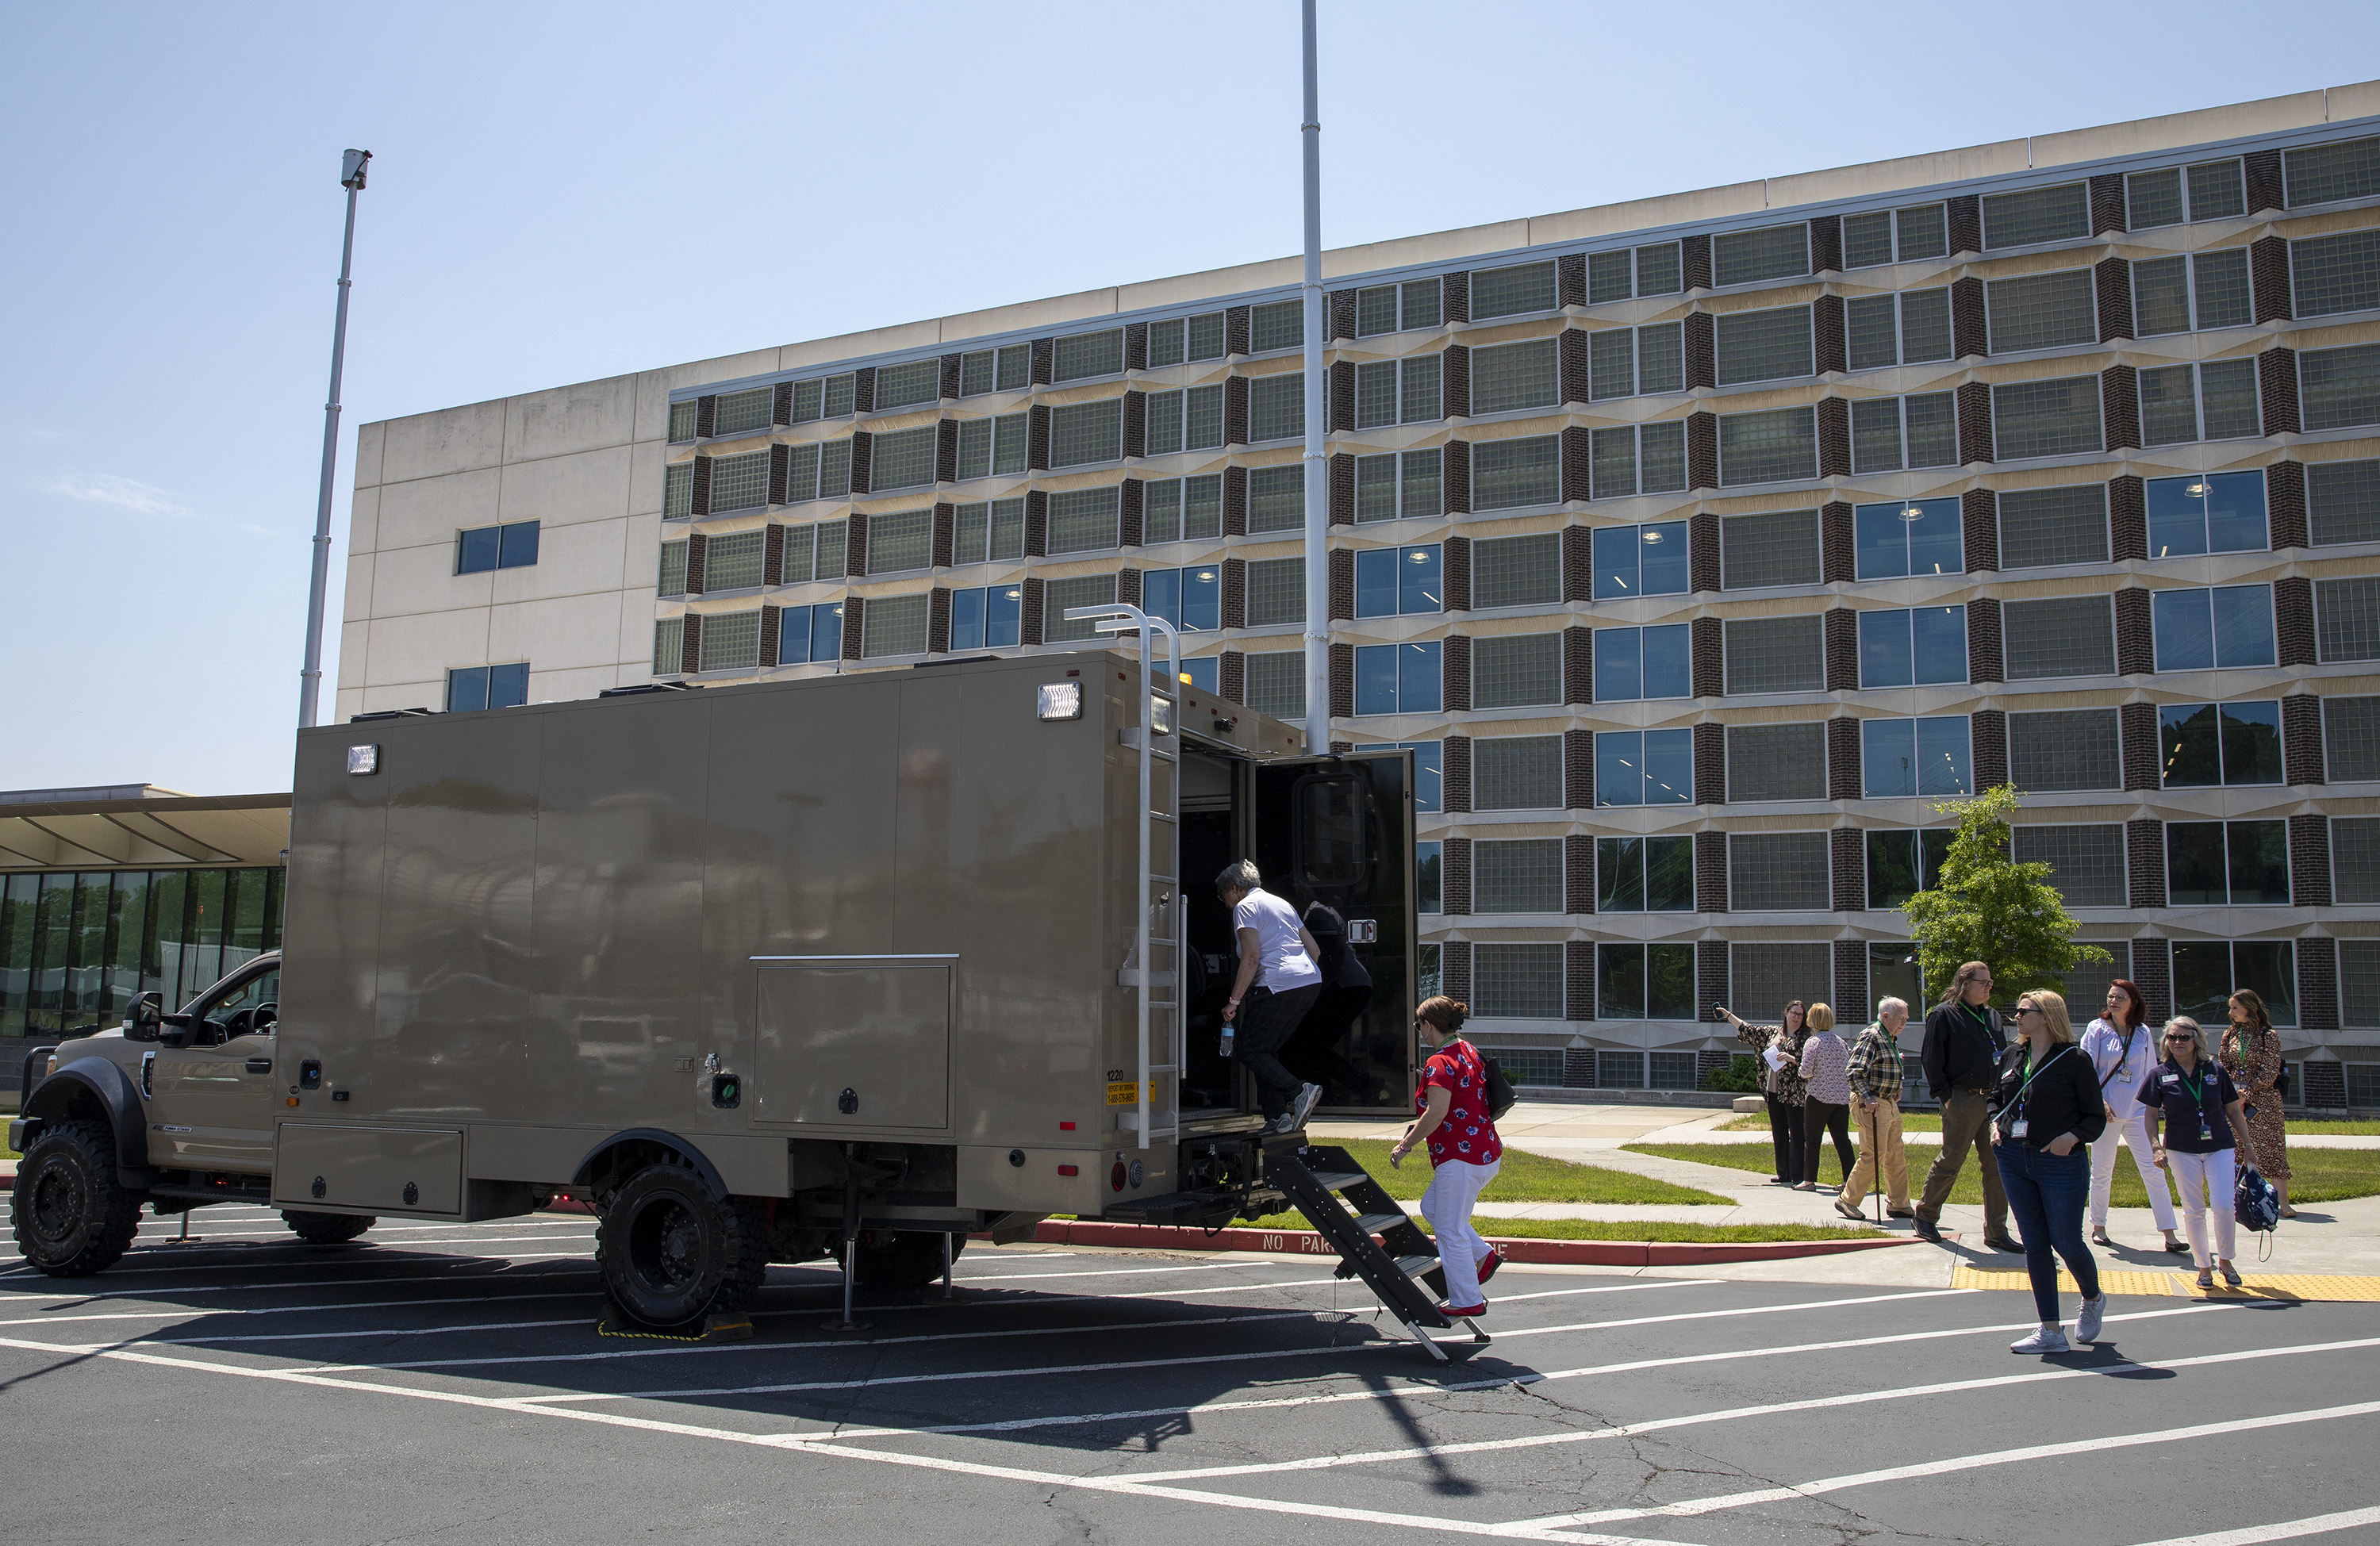 The GTRI Research Electronic Warfare Truck (GREWT), a modified Ford F-550 truck shown here being toured by members of the Honorary Commanders Alumni Association, supports field testing of aircraft defensive systems. (Credit: Sean McNeil, GTRI)